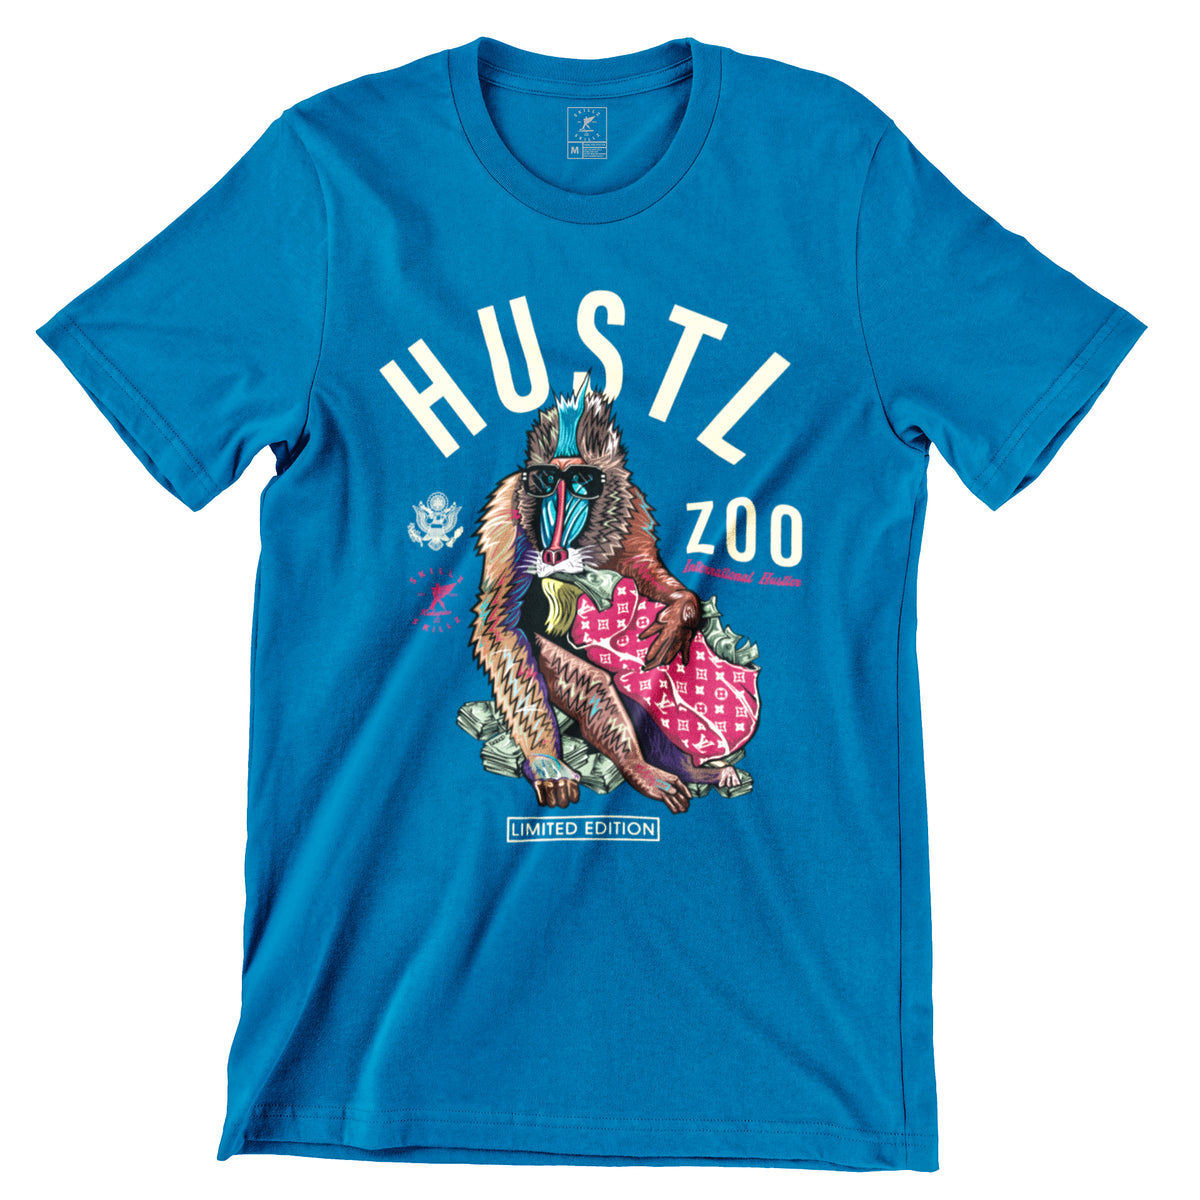 "Hustlers Zoo Blue" Limited Edition Tee